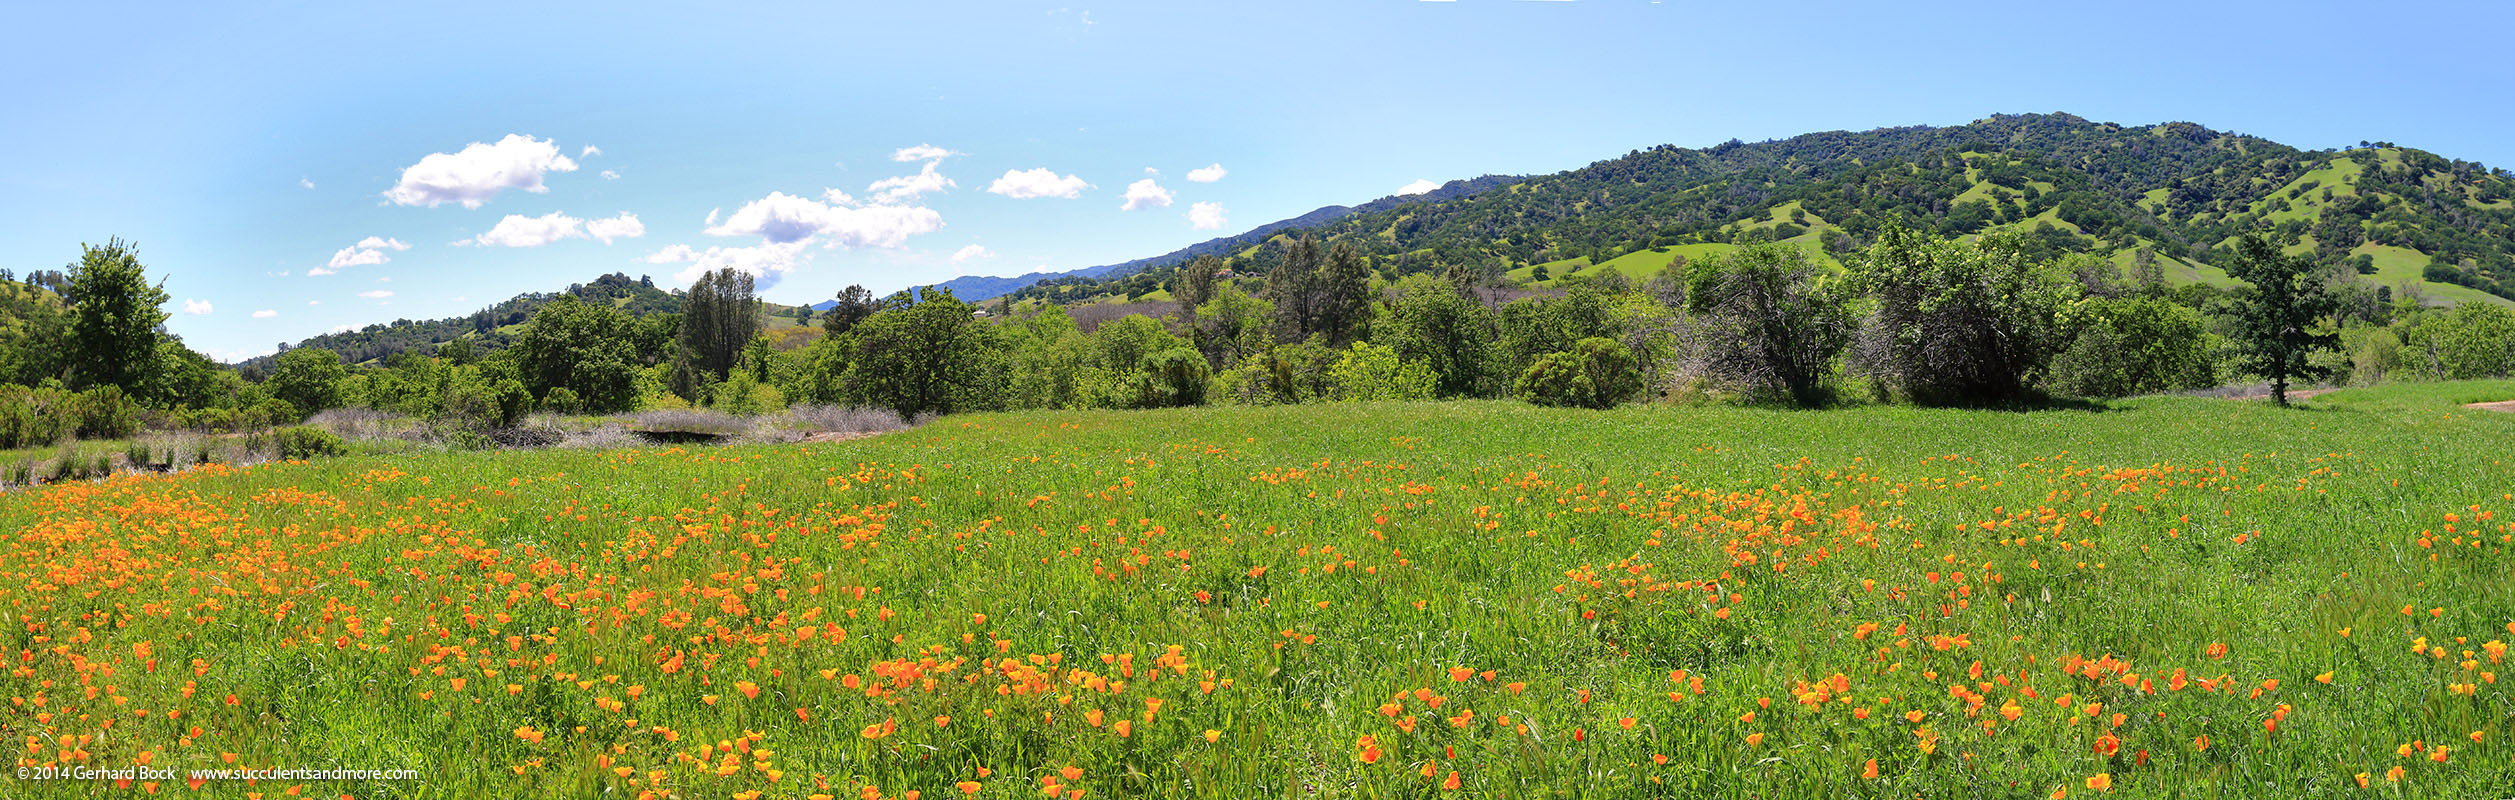 Green hills and California poppy meadow